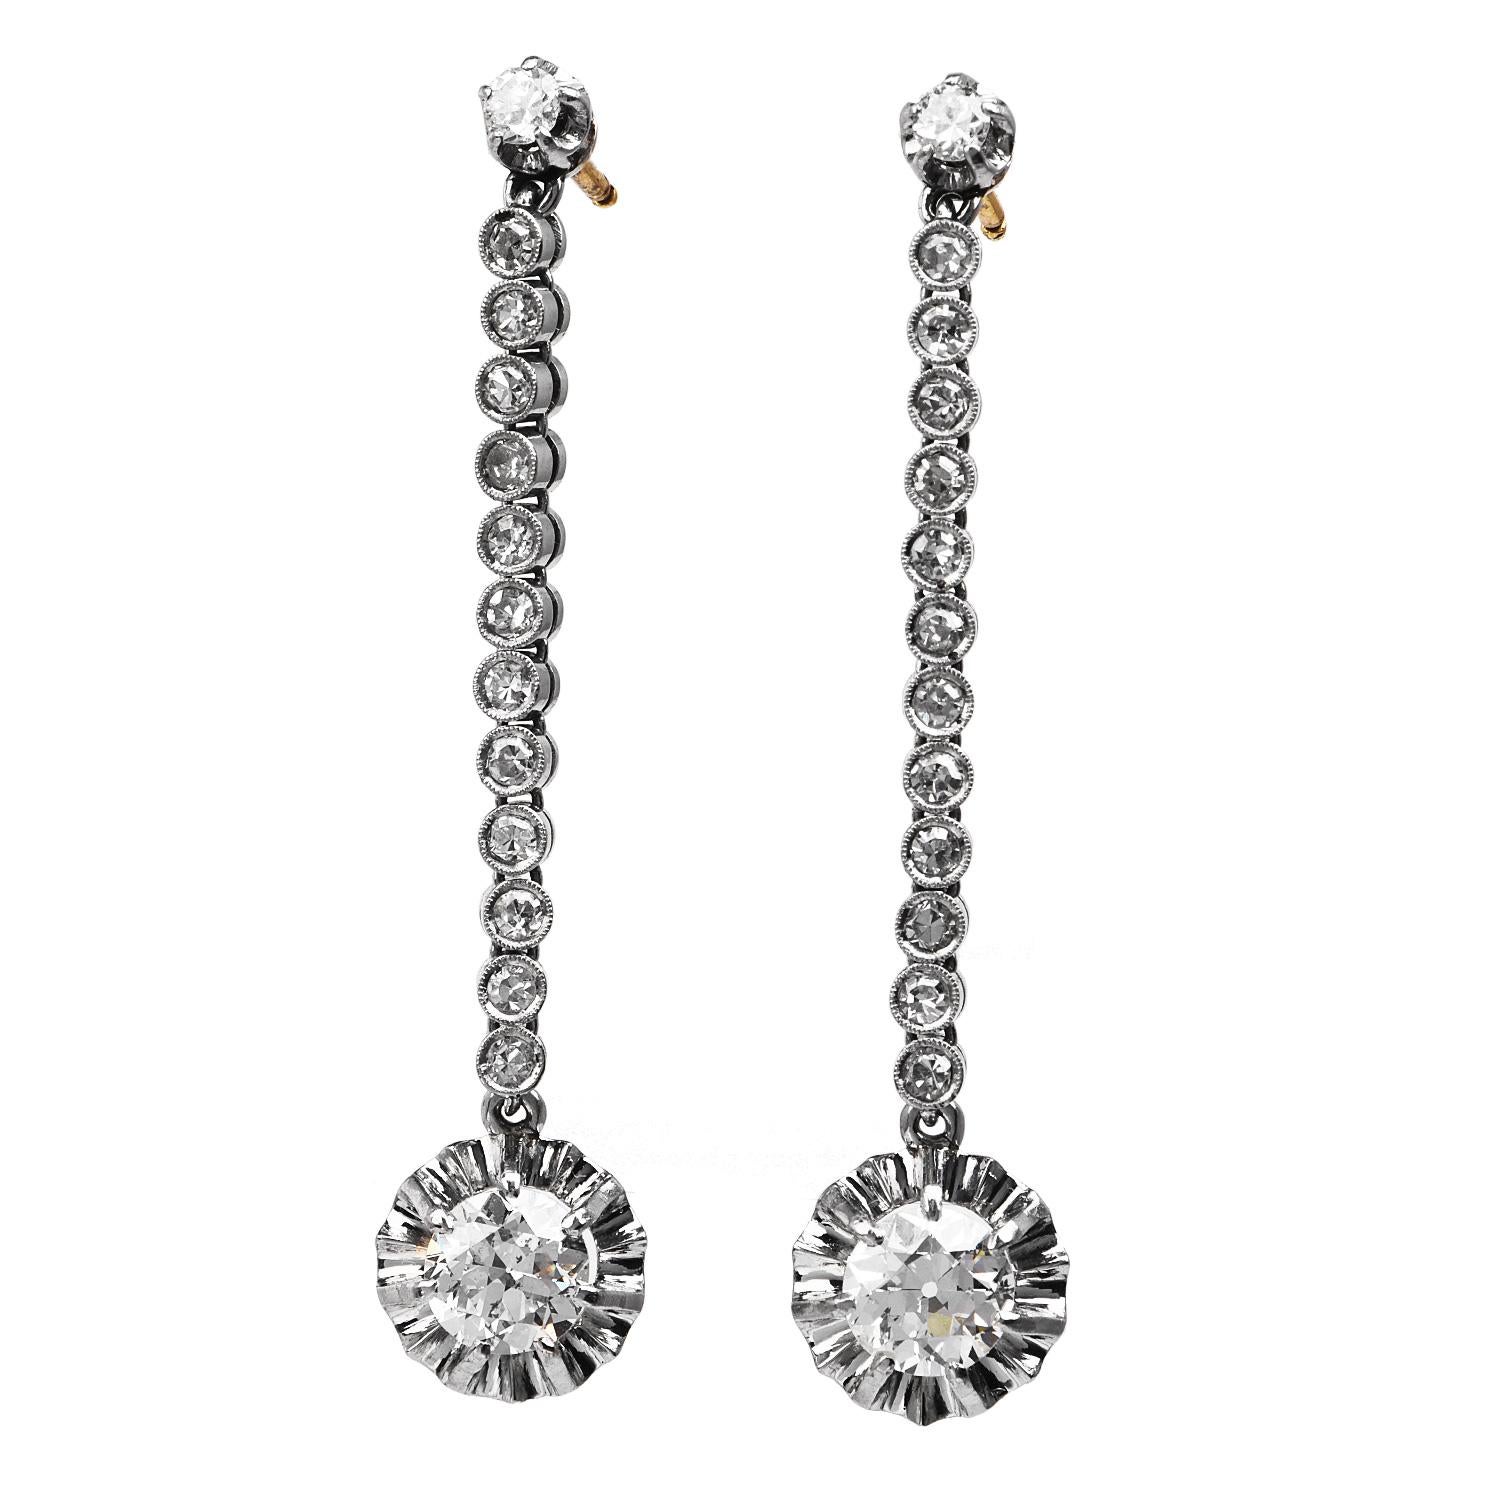 Charm those around you with these lovely Vintage Diamond Platinum Old European Drop Dangle Earrings,

these delightful earrings are crafted in luxurious platinum with Yellow gold pushbacks.

They host in each center two prominent old European cut,